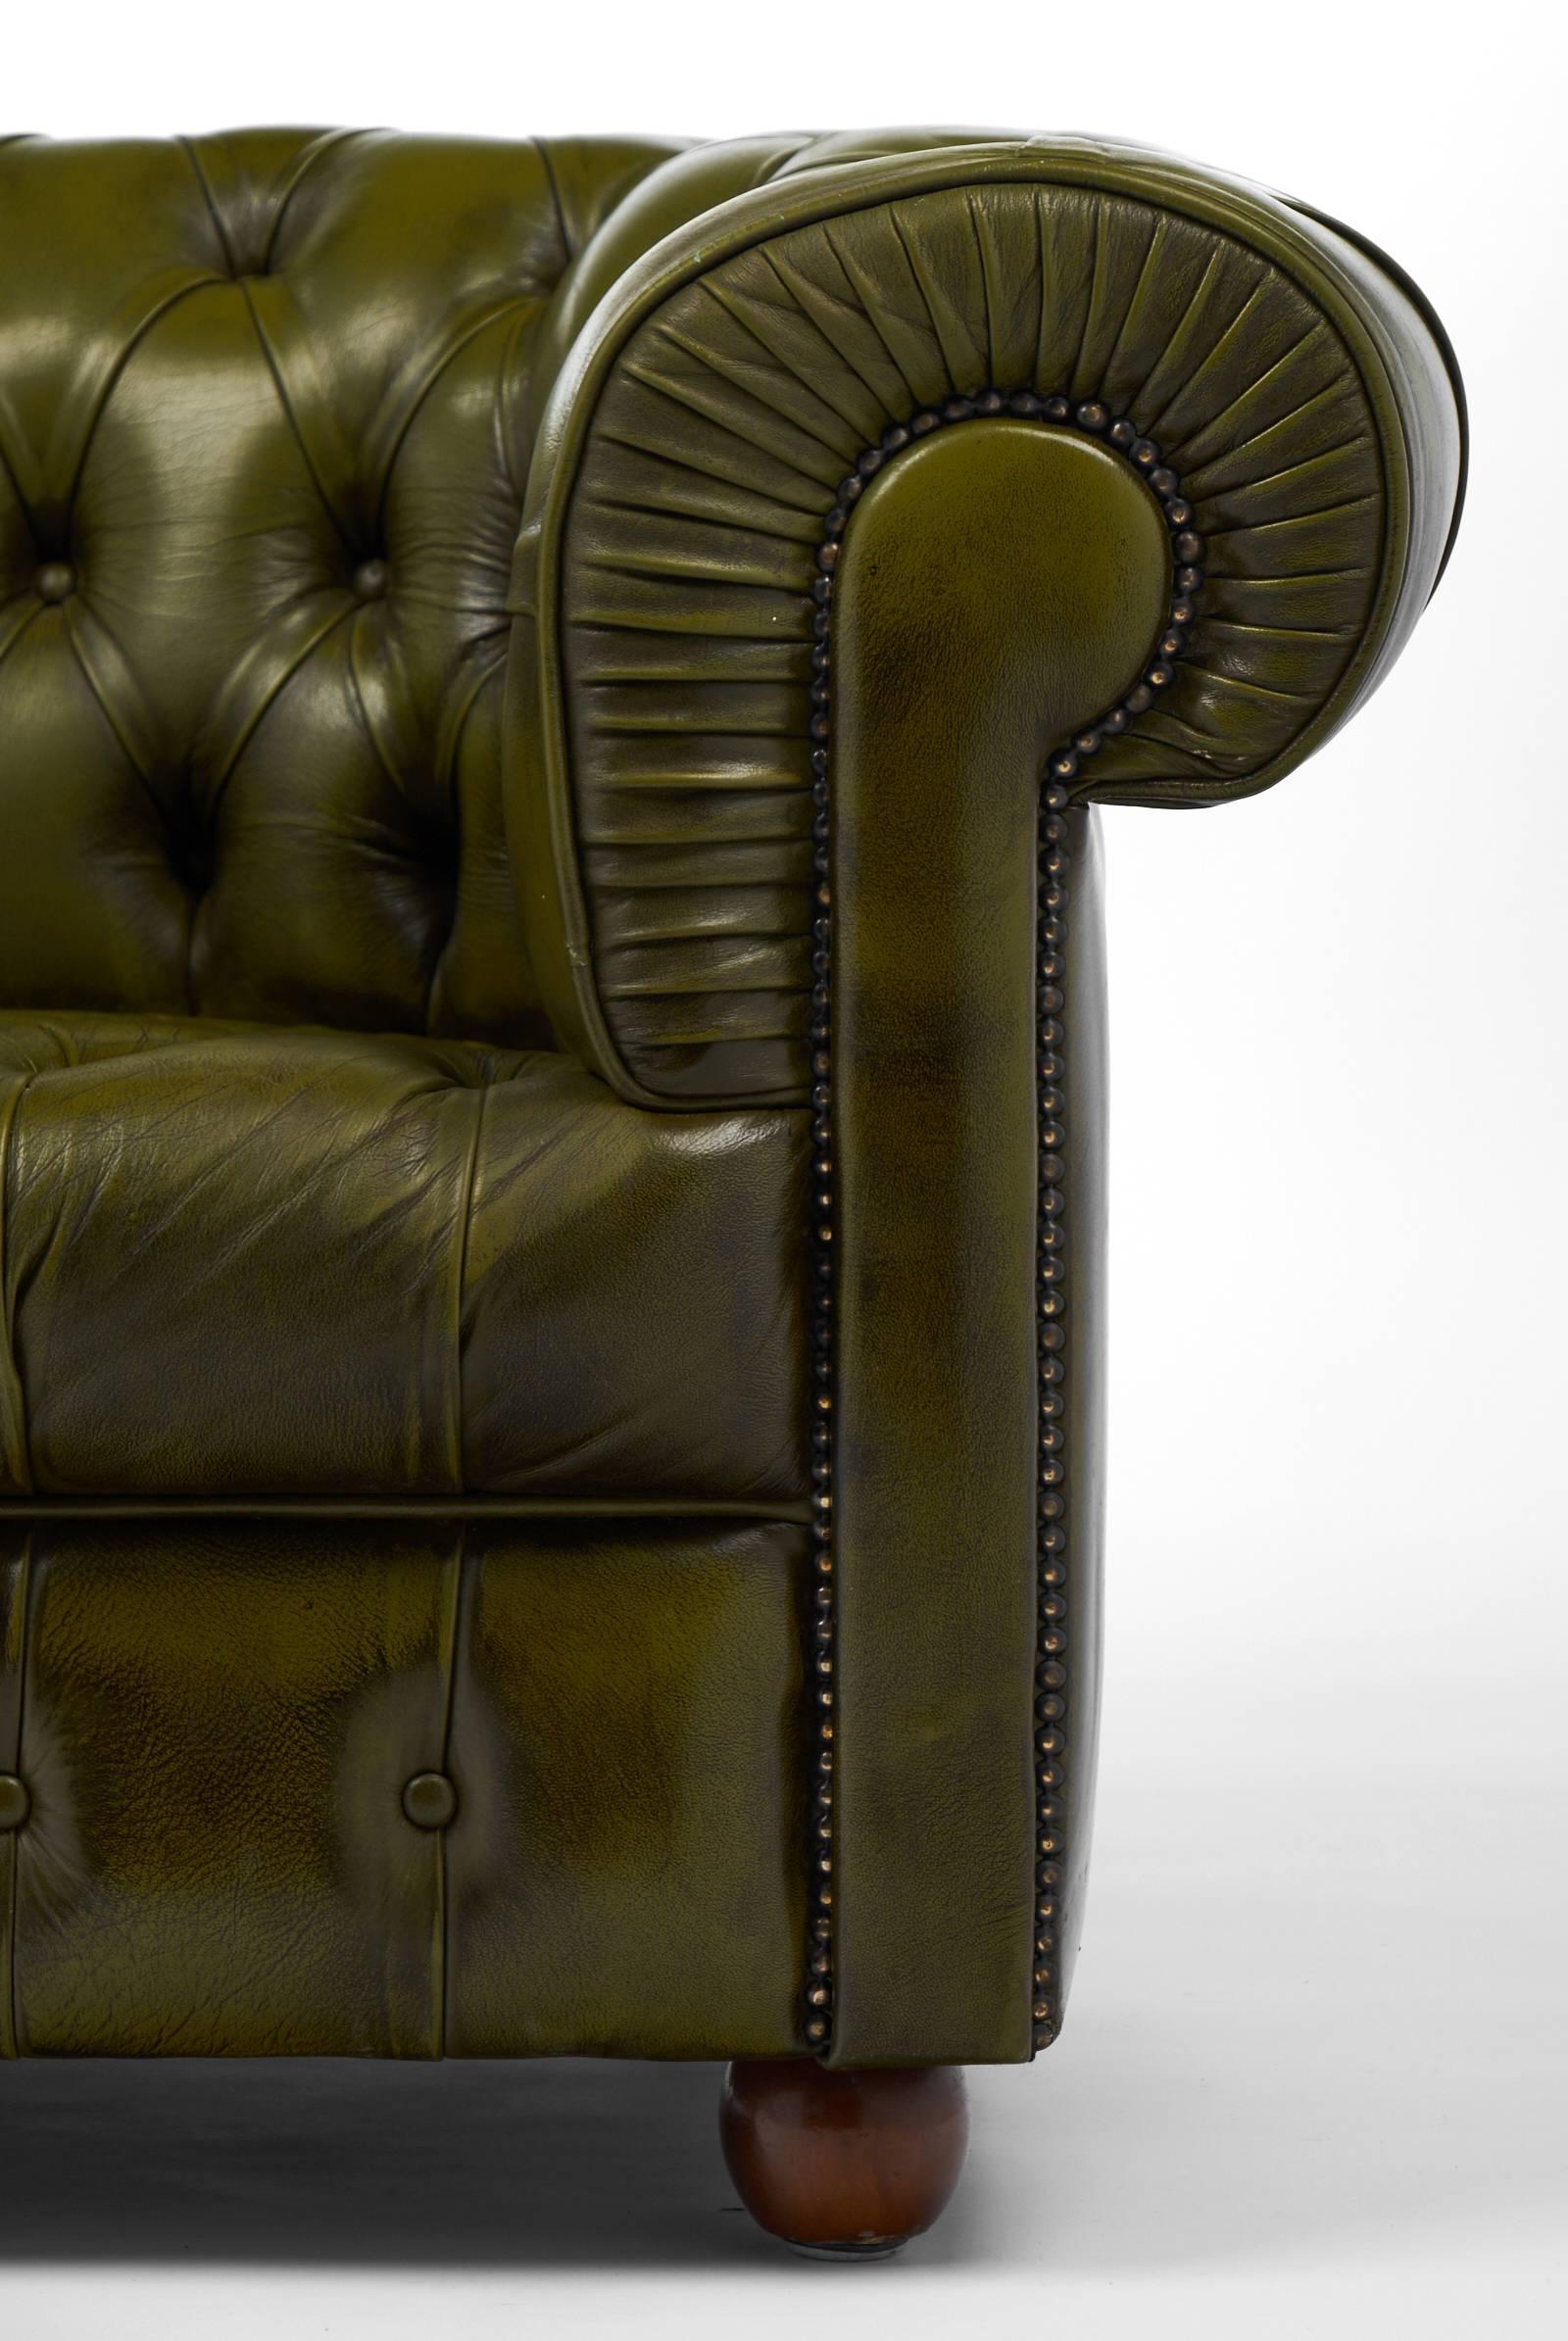 Vintage Green Leather Chesterfield Club Chair 1